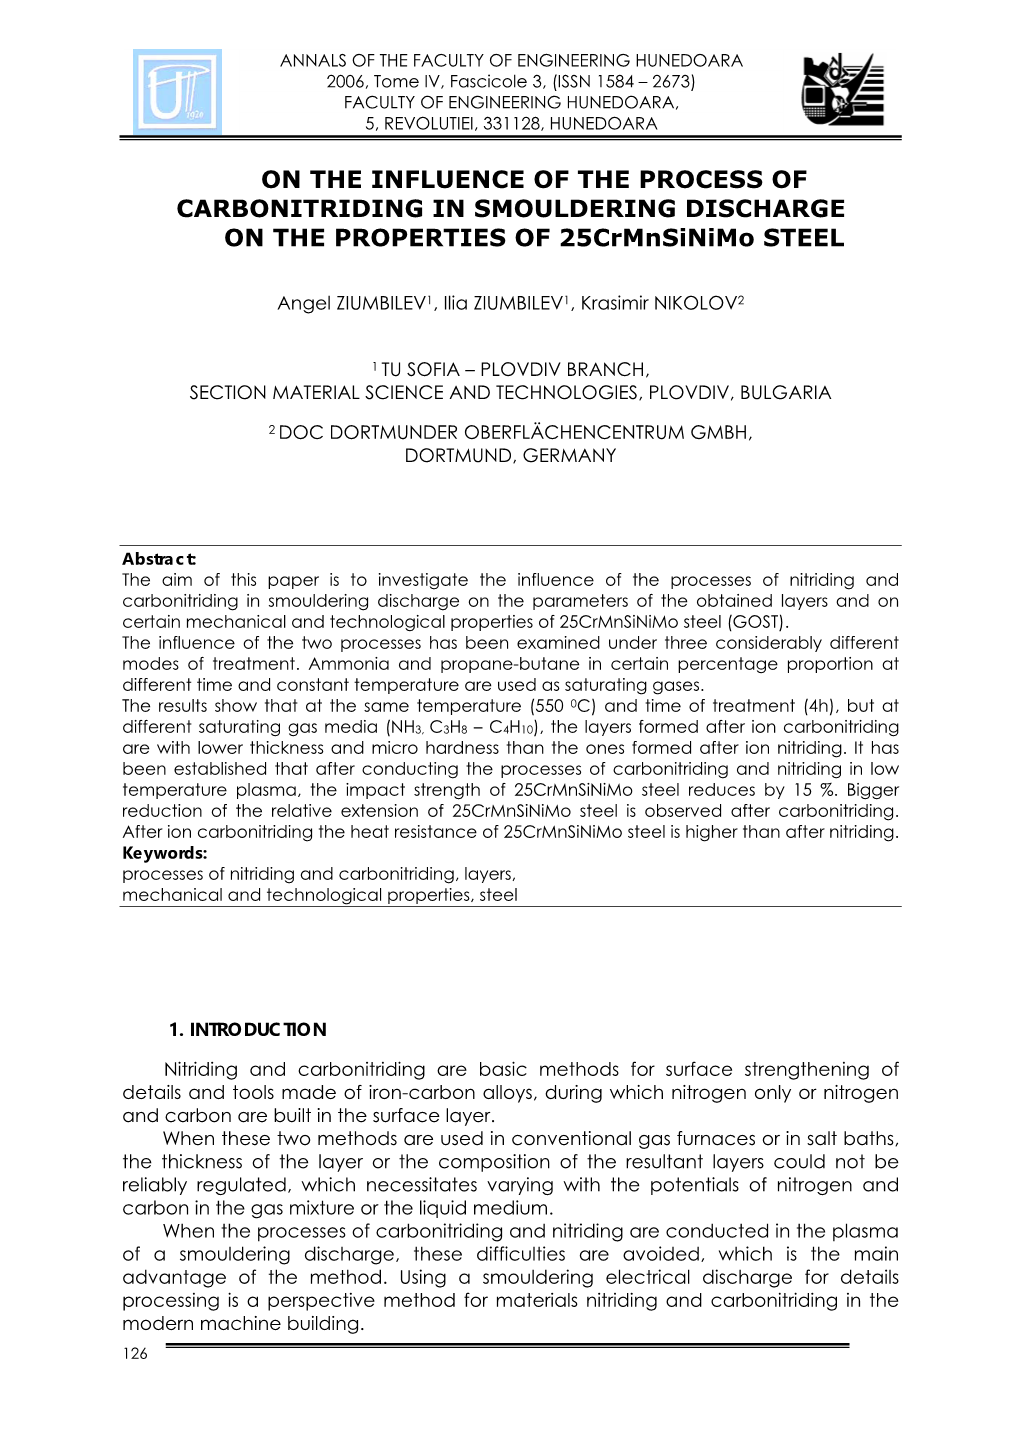 ON the INFLUENCE of the PROCESS of CARBONITRIDING in SMOULDERING DISCHARGE on the PROPERTIES of 25Crmnsinimo STEEL